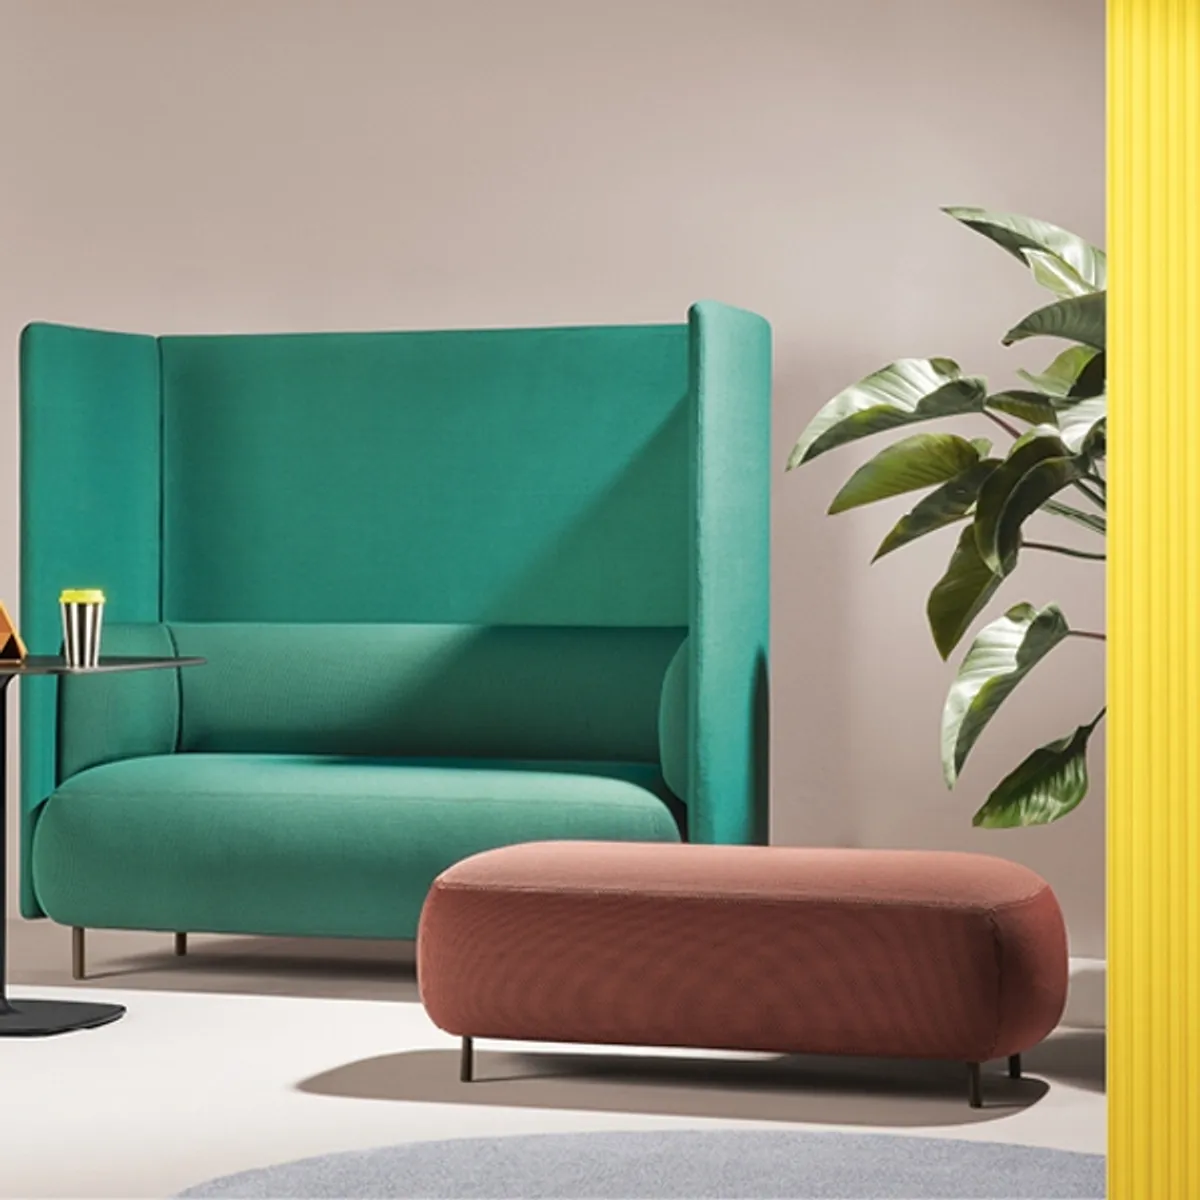 Buddy hub sofa Inside Out Contracts3